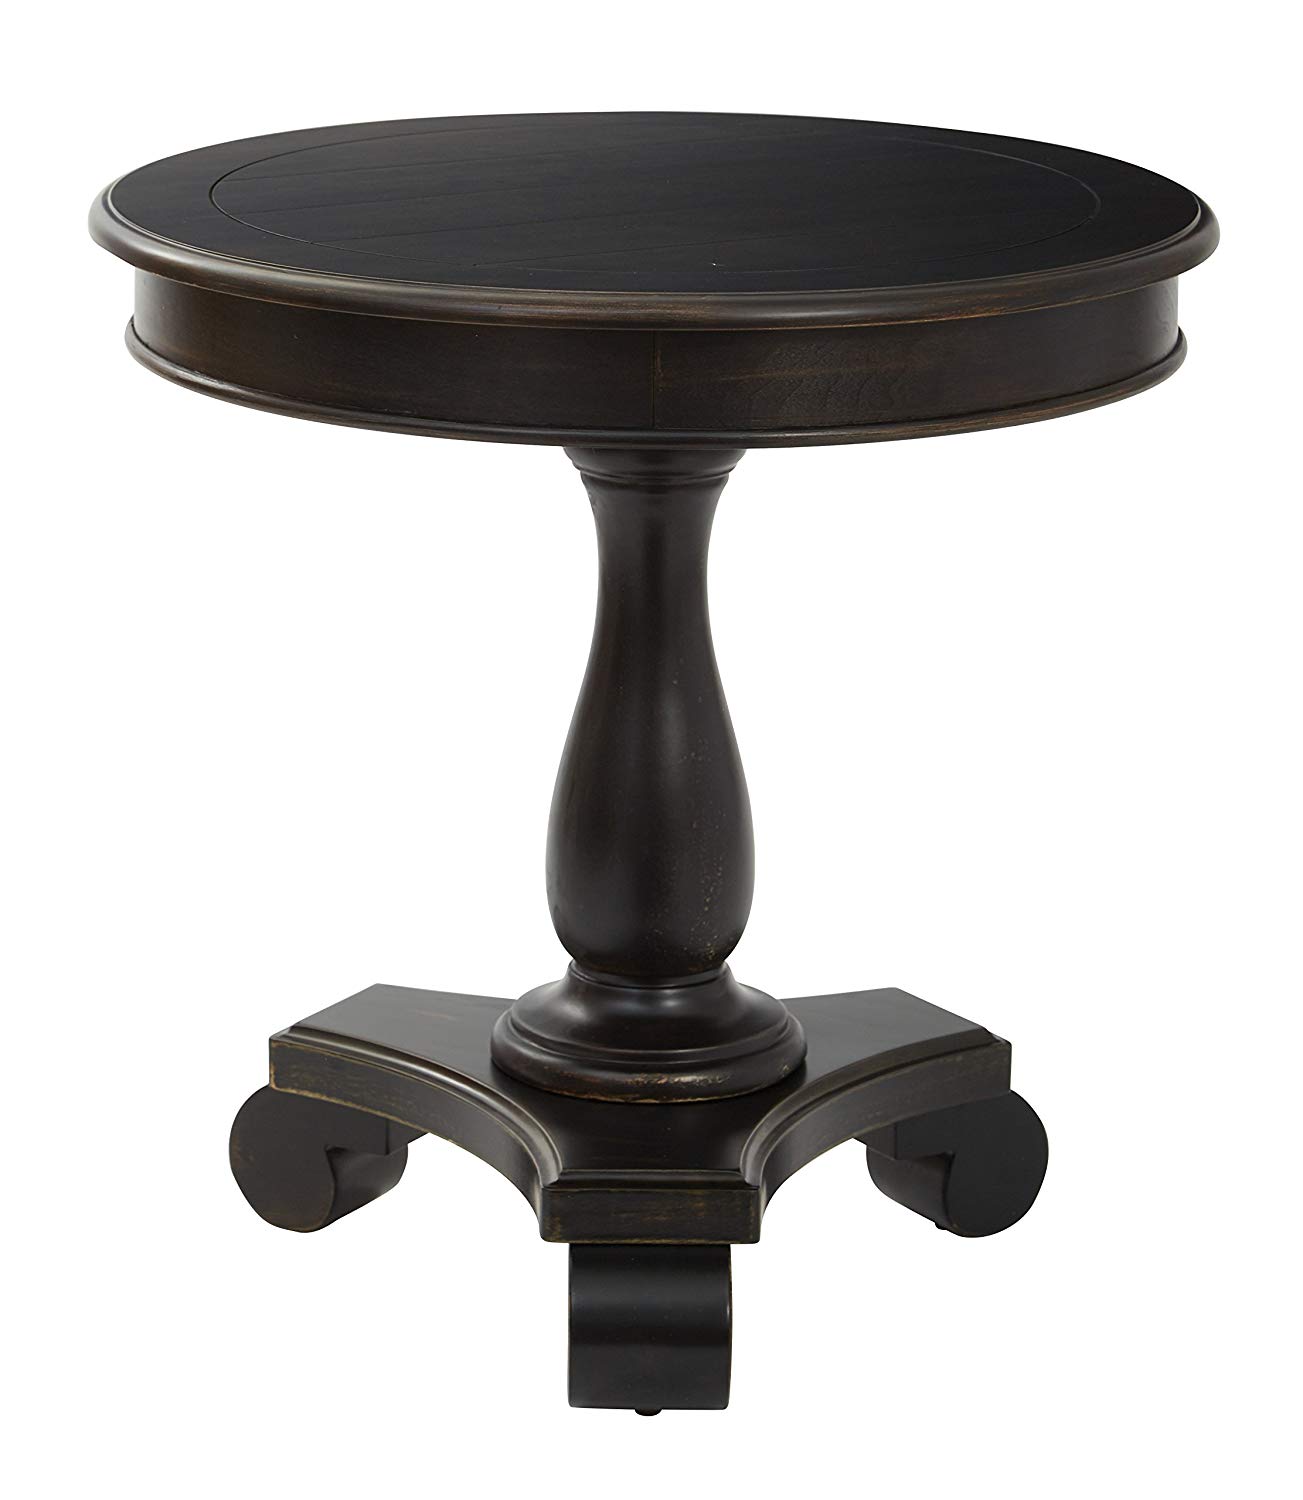 inspired bassett avlat osp avalon round black accent table antique kitchen dining coffee and matching side tables elephant sculpture tablecloth maritime pendant glass end crystal